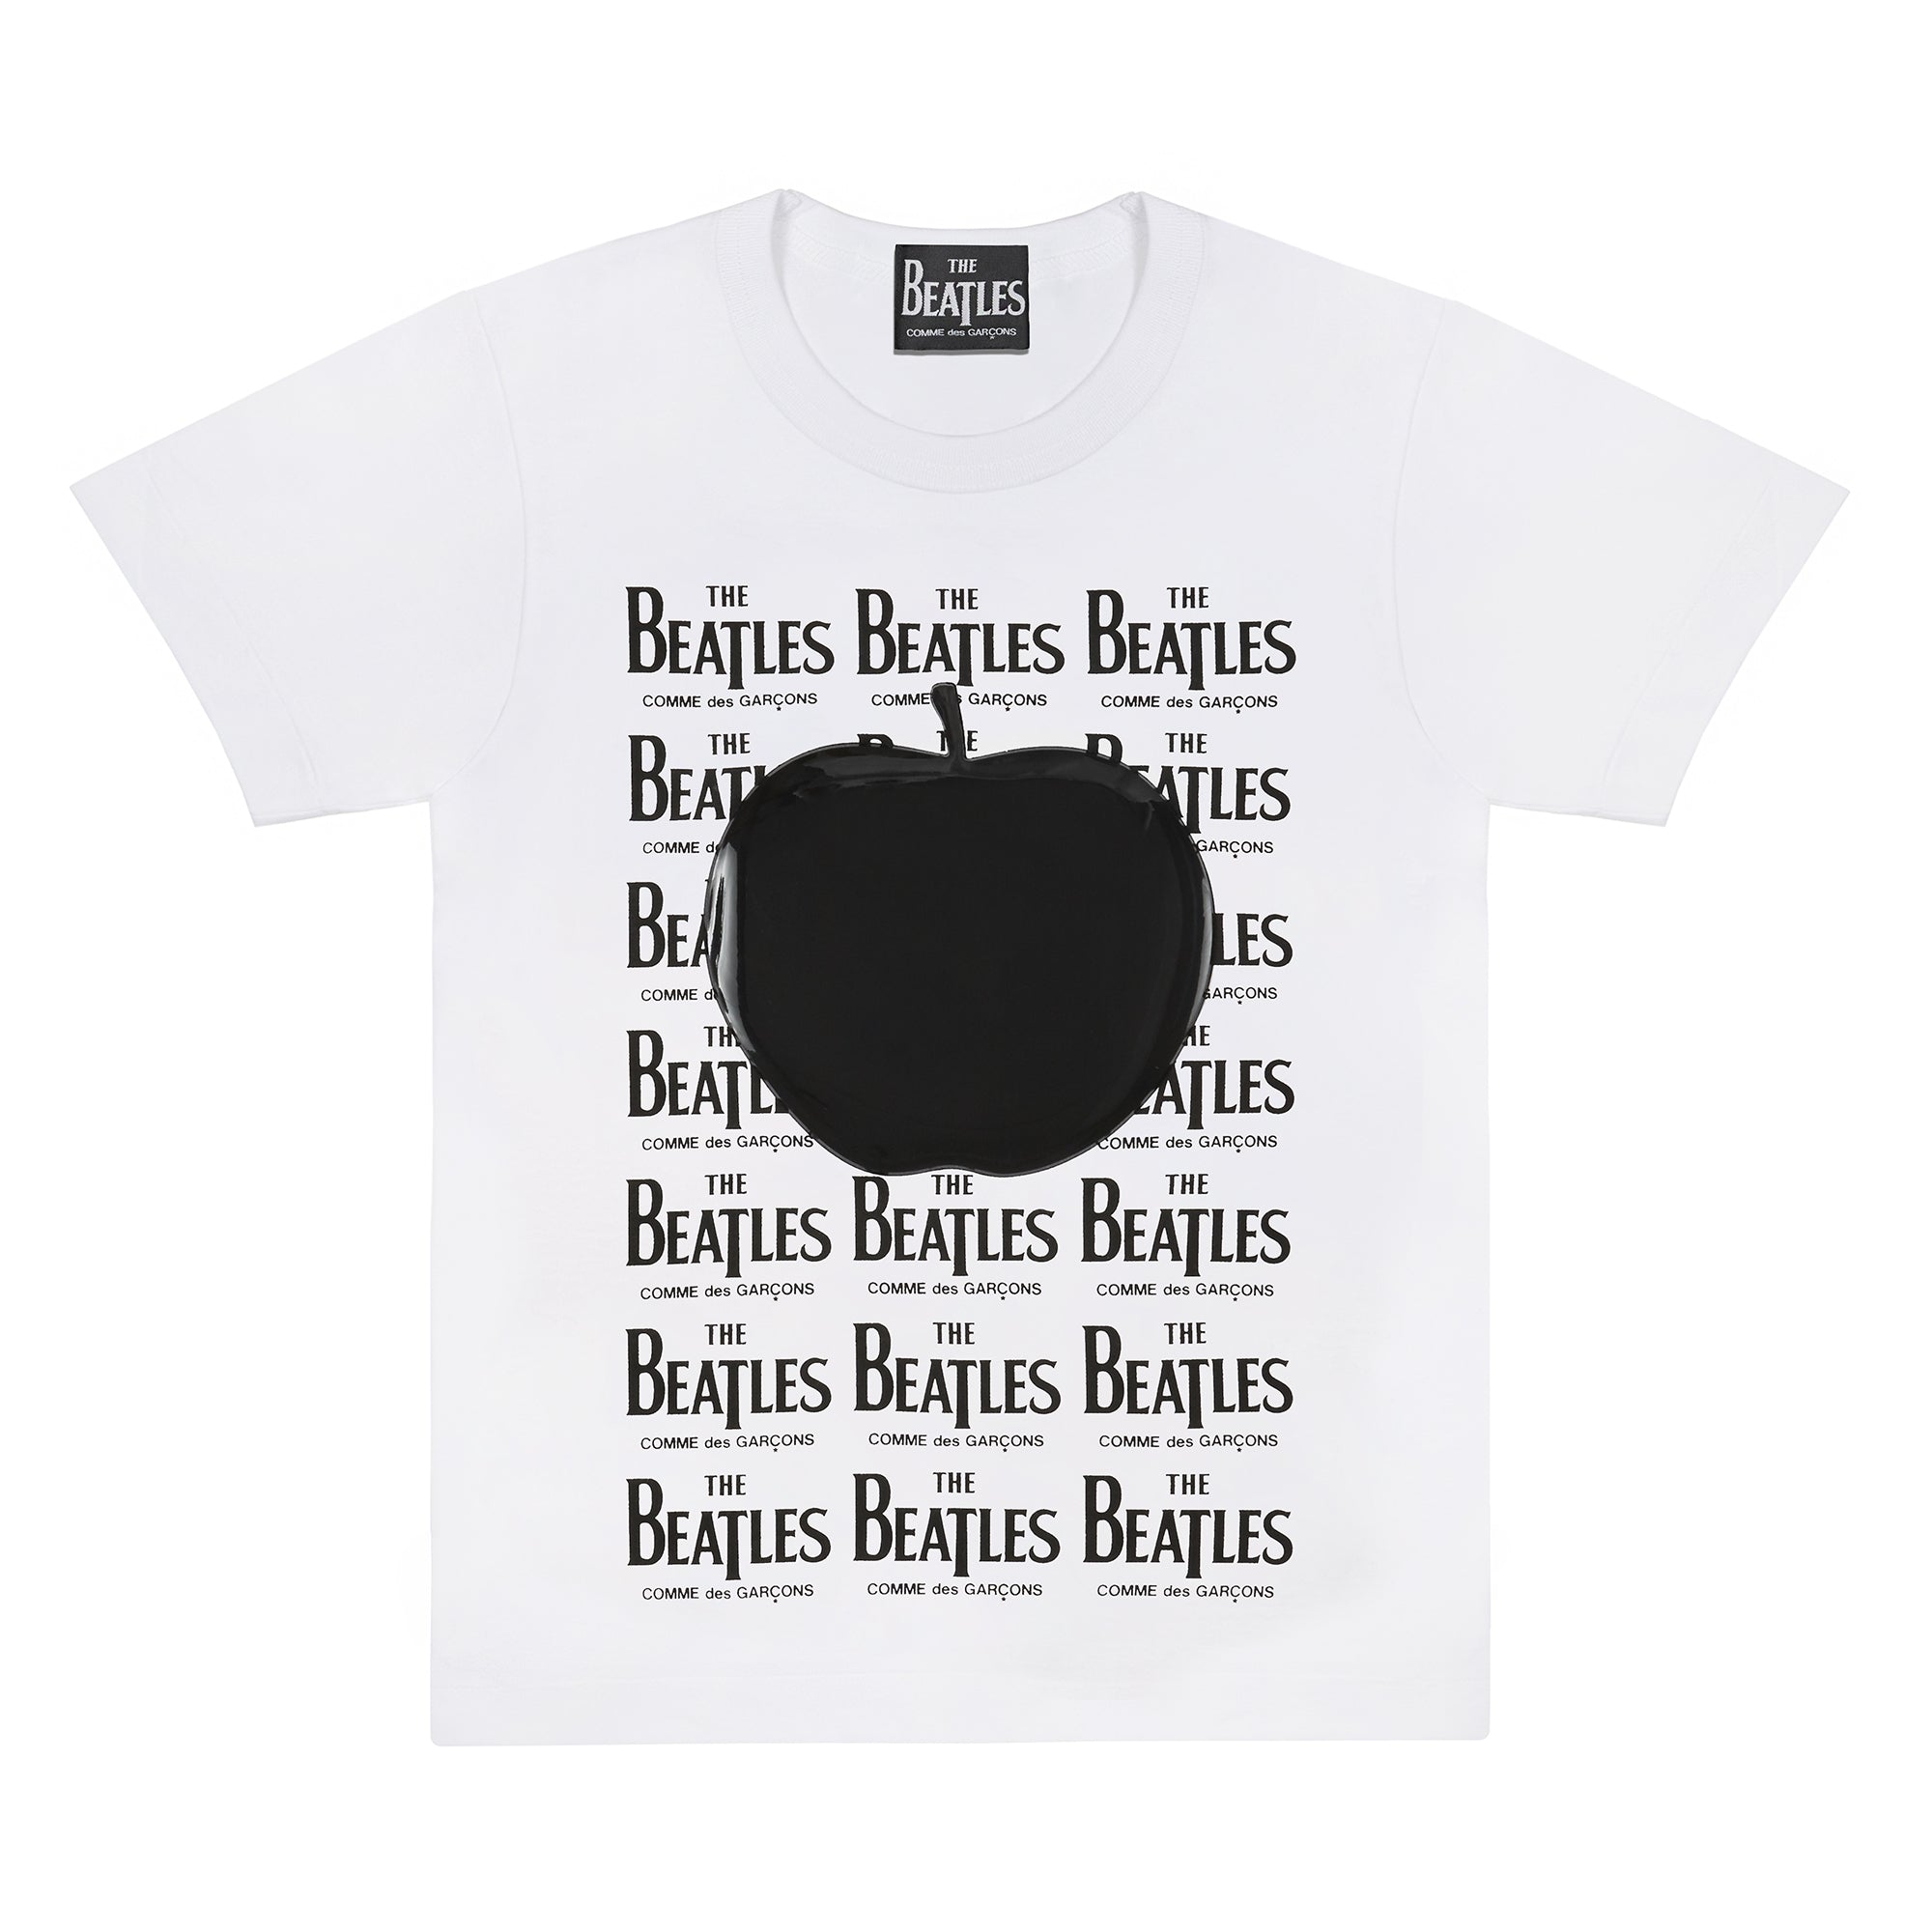 The Beatles CDG - Rubber Printed T-Shirt White - (VT-T003-051) view 1